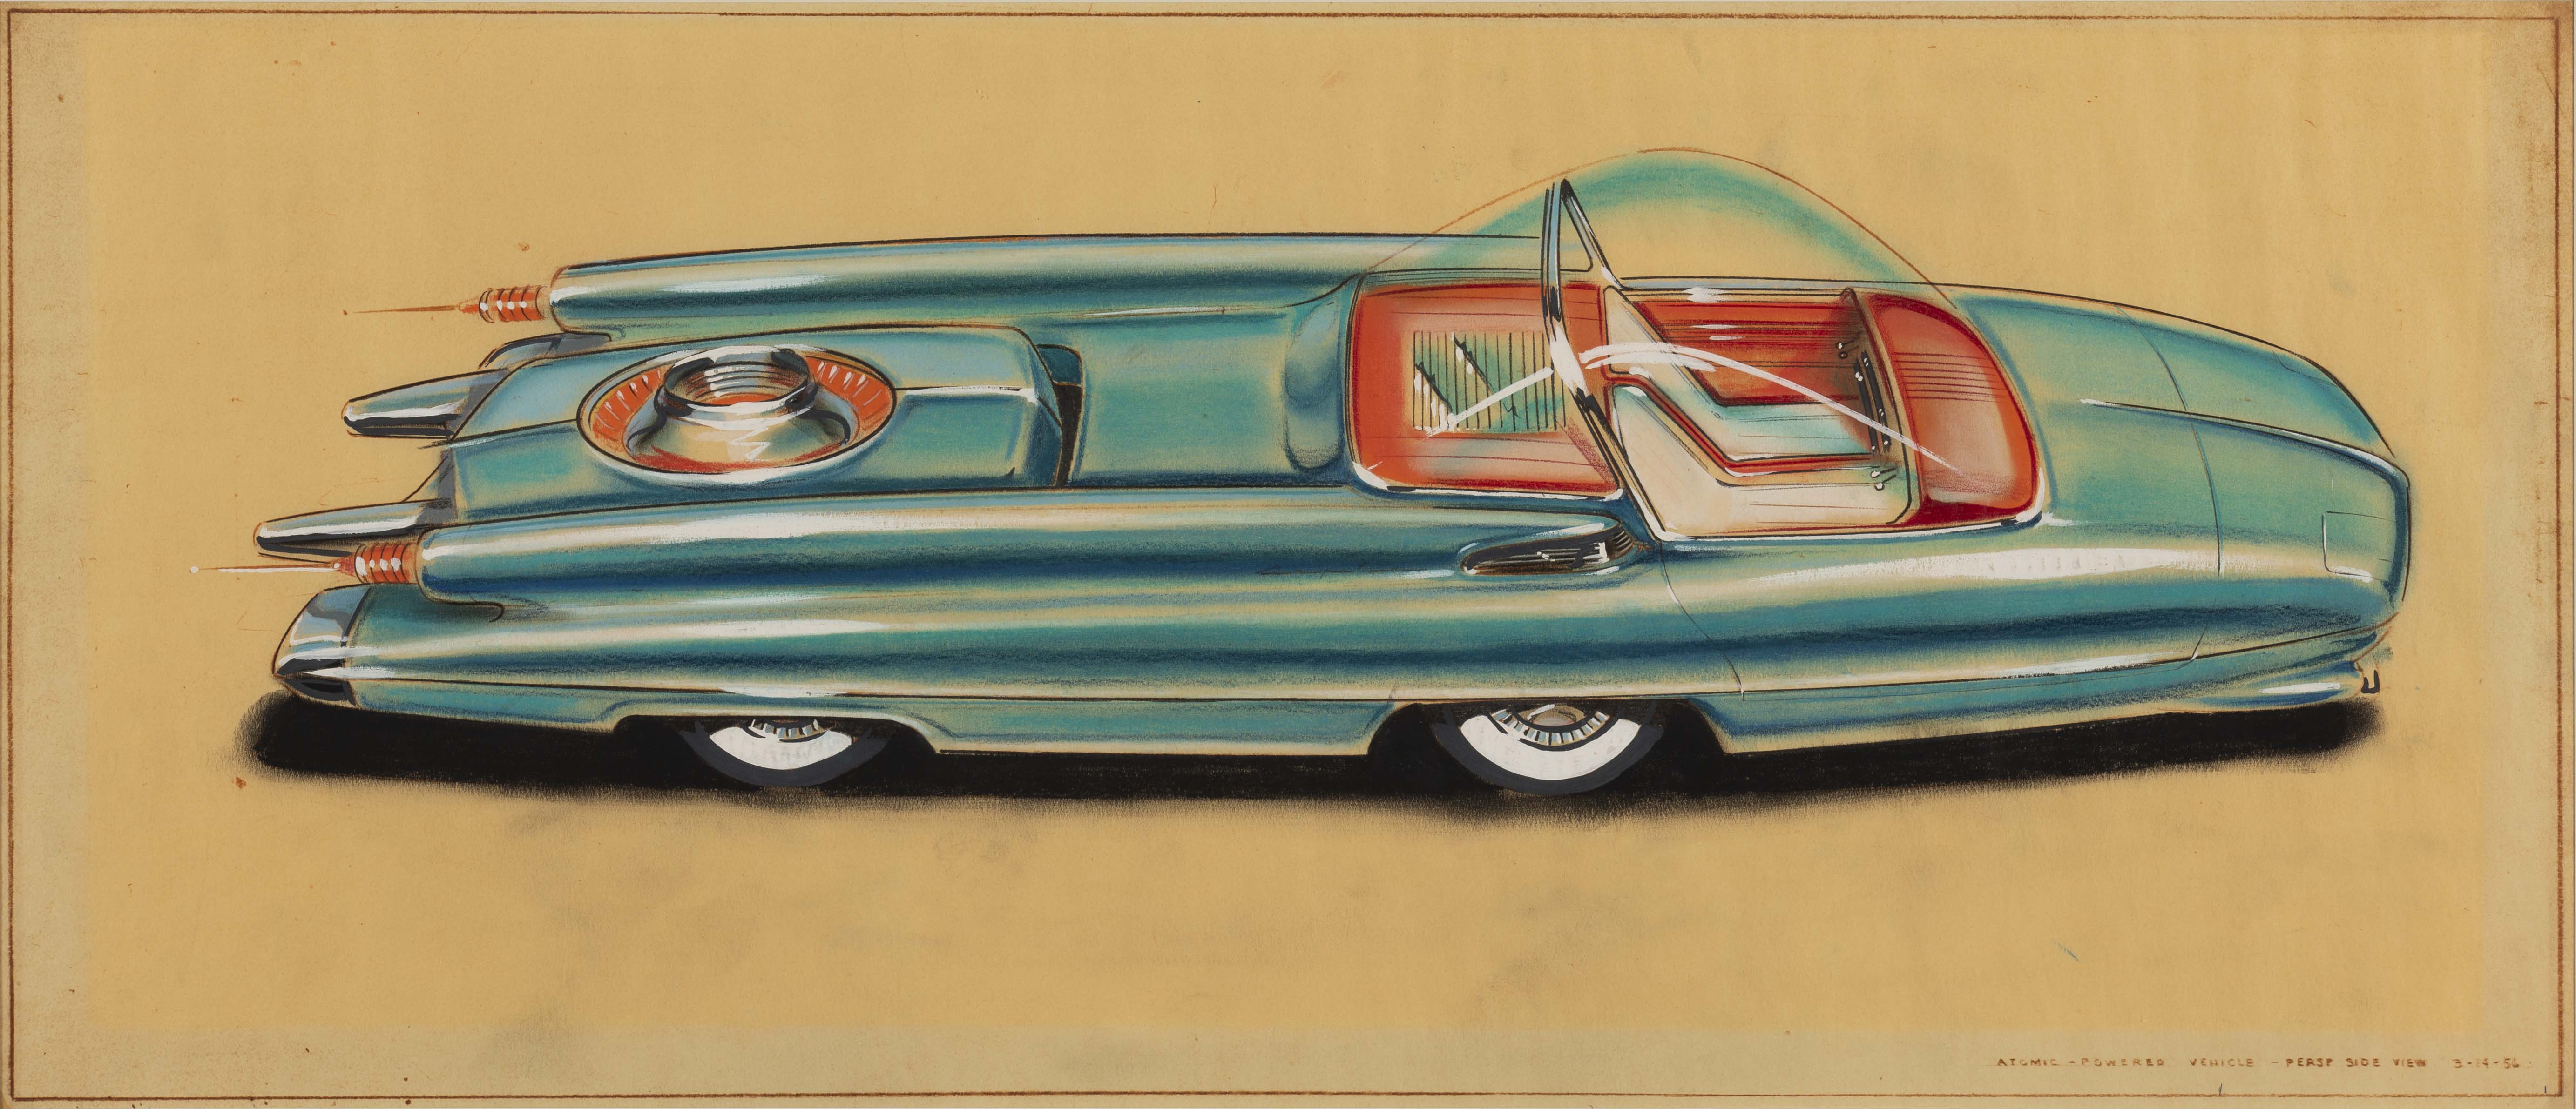 Ford Nucleon Atomic Powered Vehicle, Rear Side View, 1956, Albert L. Mueller, American; gouache, pastel, prismacolor, brown-line print on vellum.